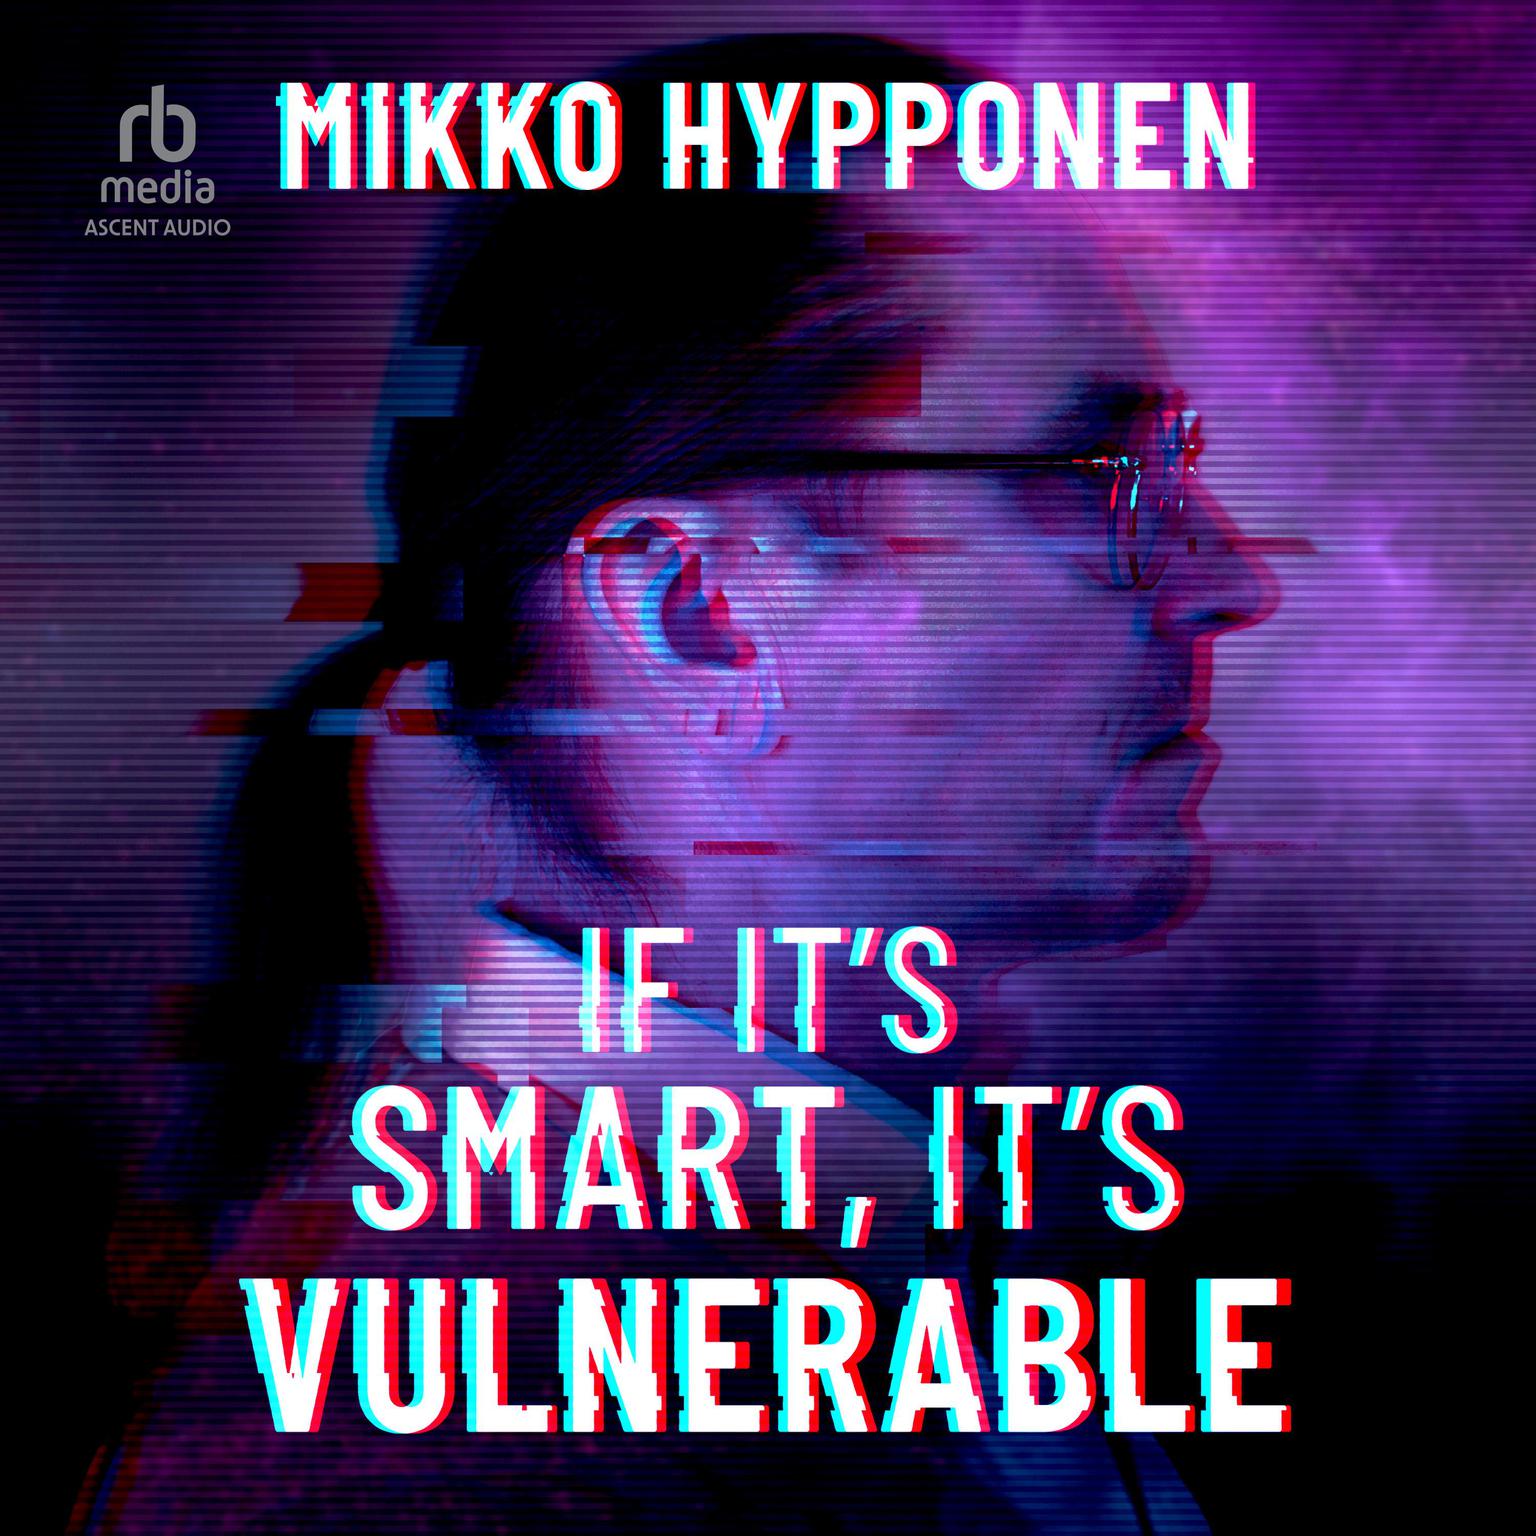 If Its Smart, Its Vulnerable Audiobook, by Mikko Hypponen